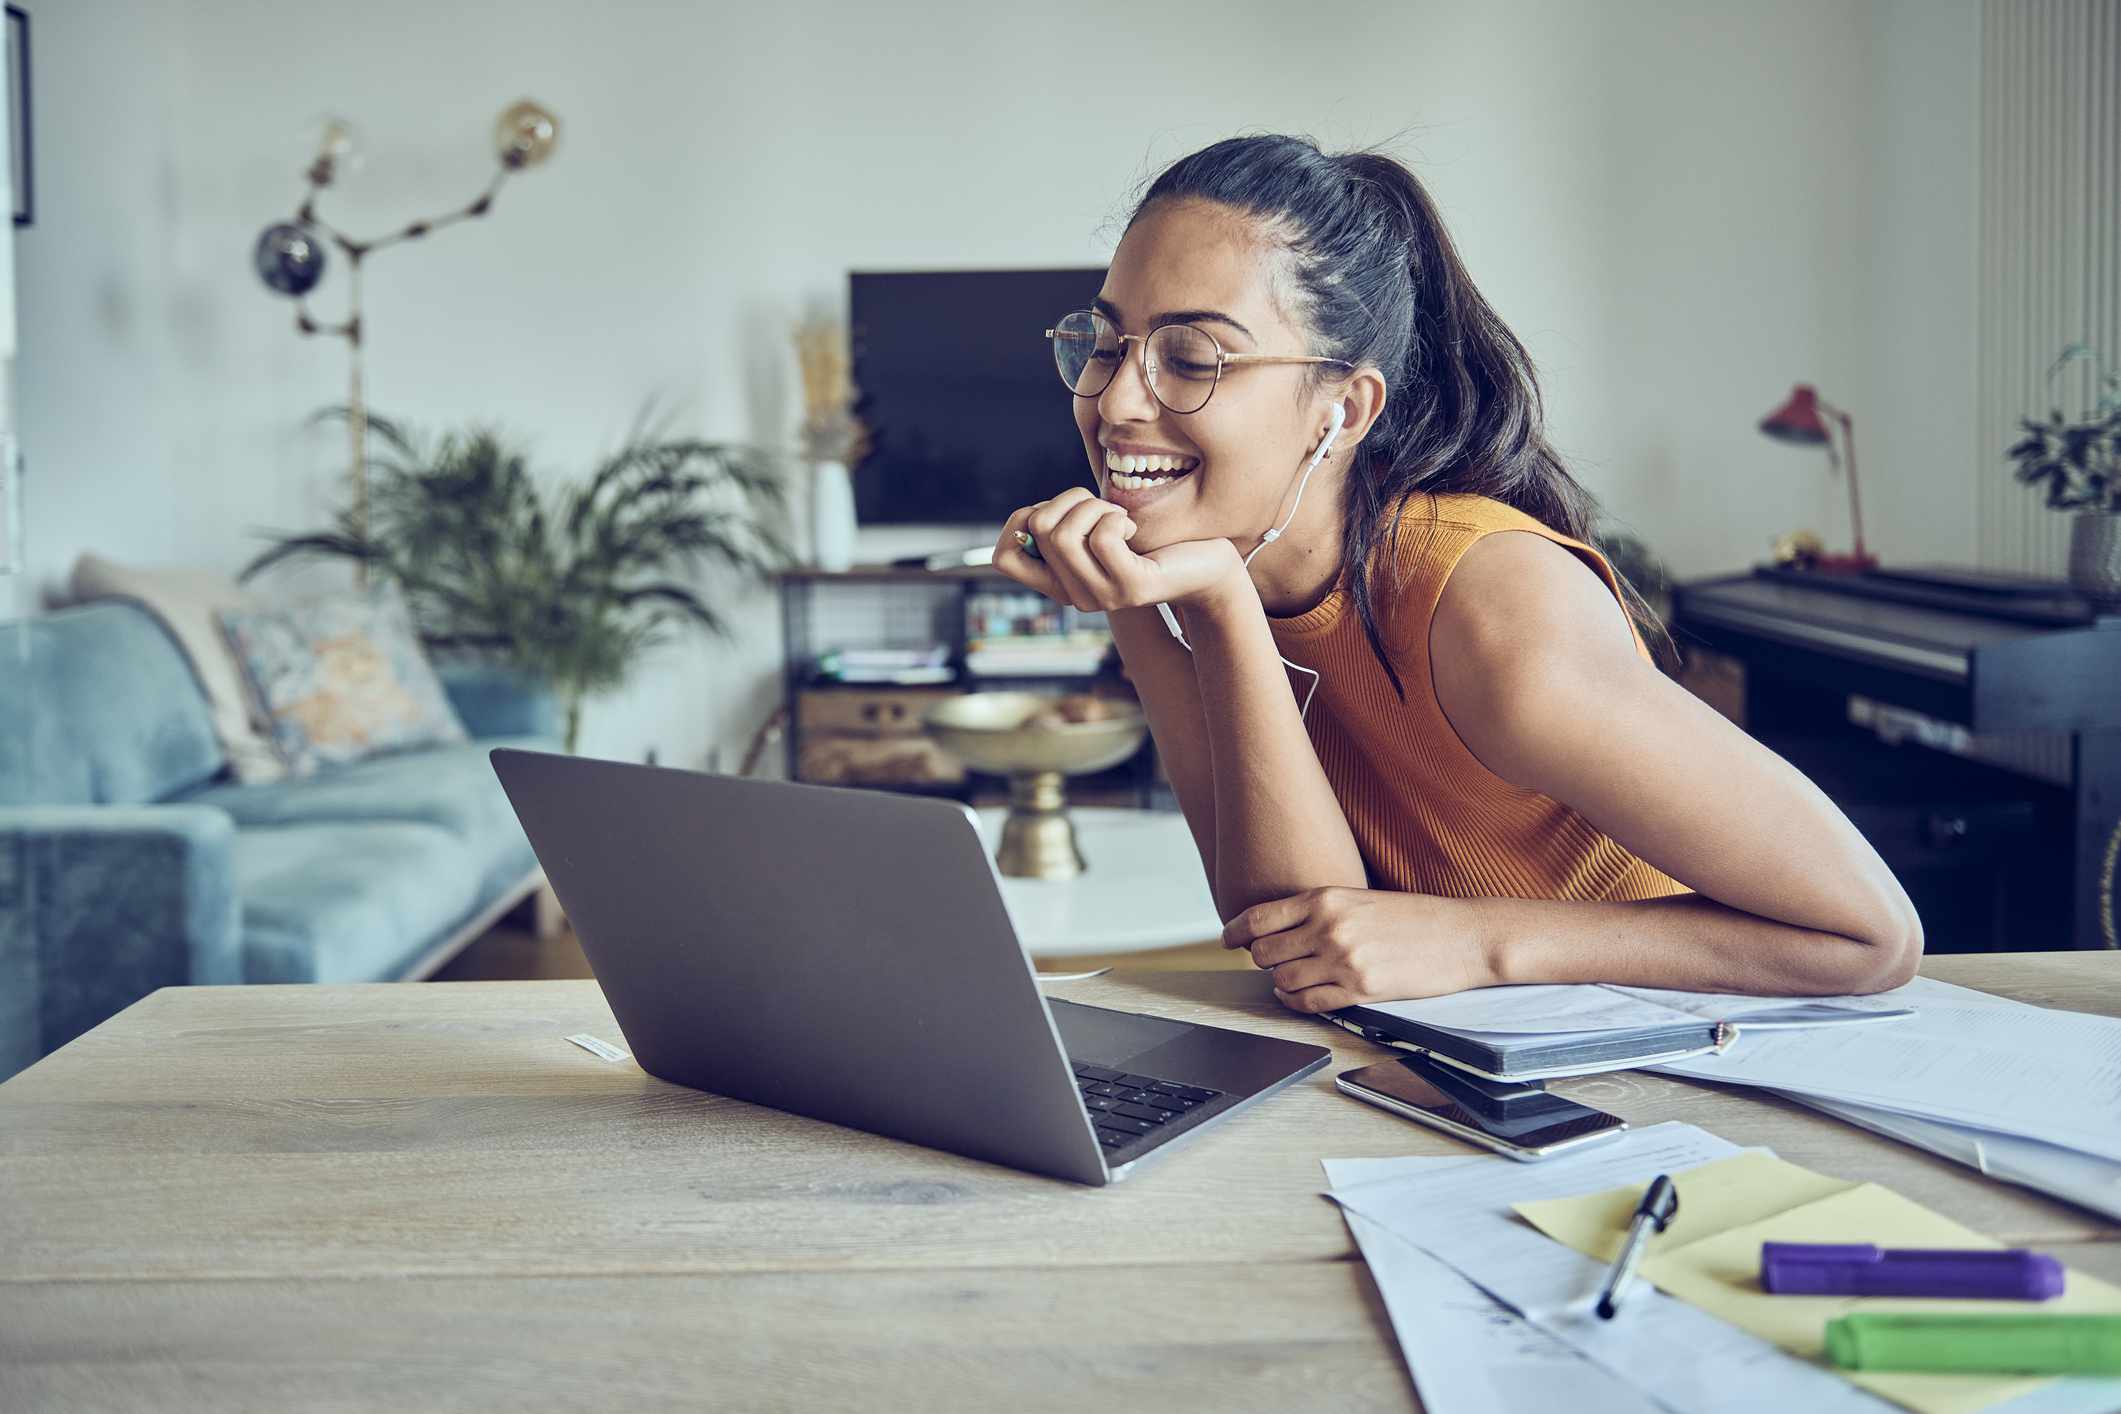 Young woman smiling and working at home on her laptop